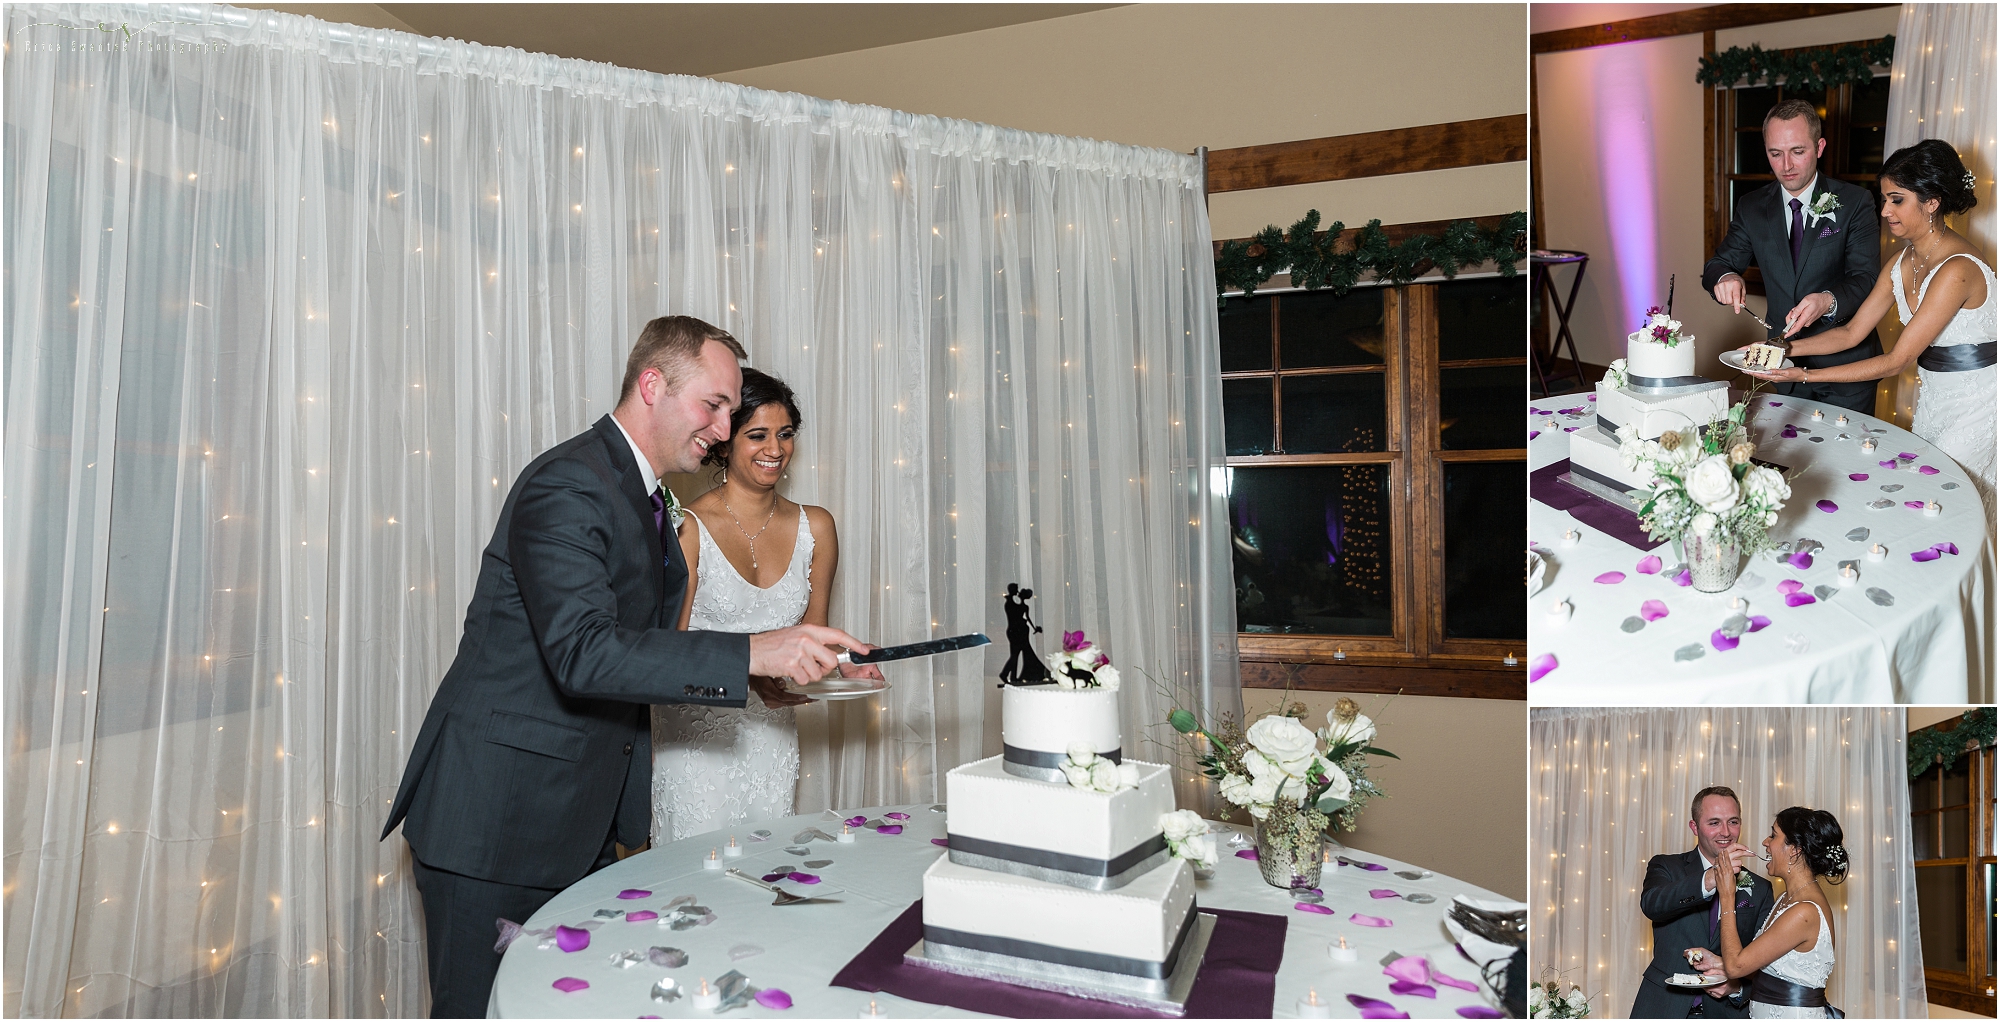 A couple cuts into their beautiful 3 tiered wedding cake created by The Cake Lady out of Bend, OR. 